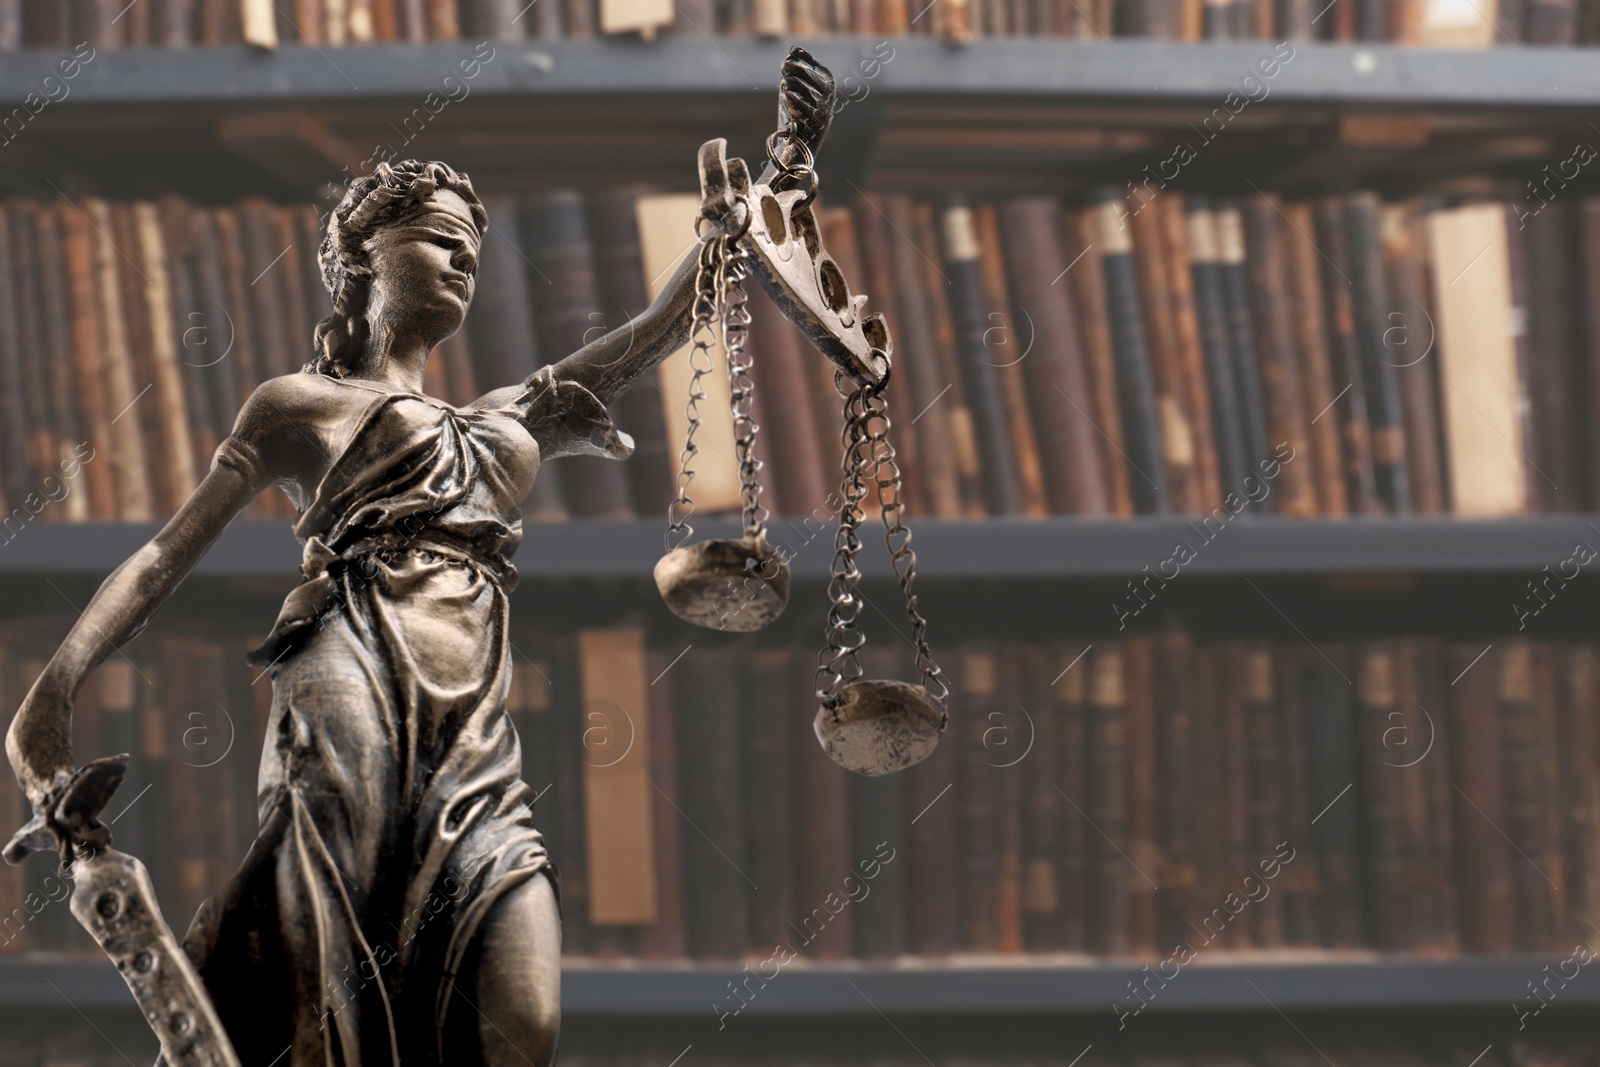 Image of Law and wisdom. Statue of Lady Justice near shelves with books, space for text